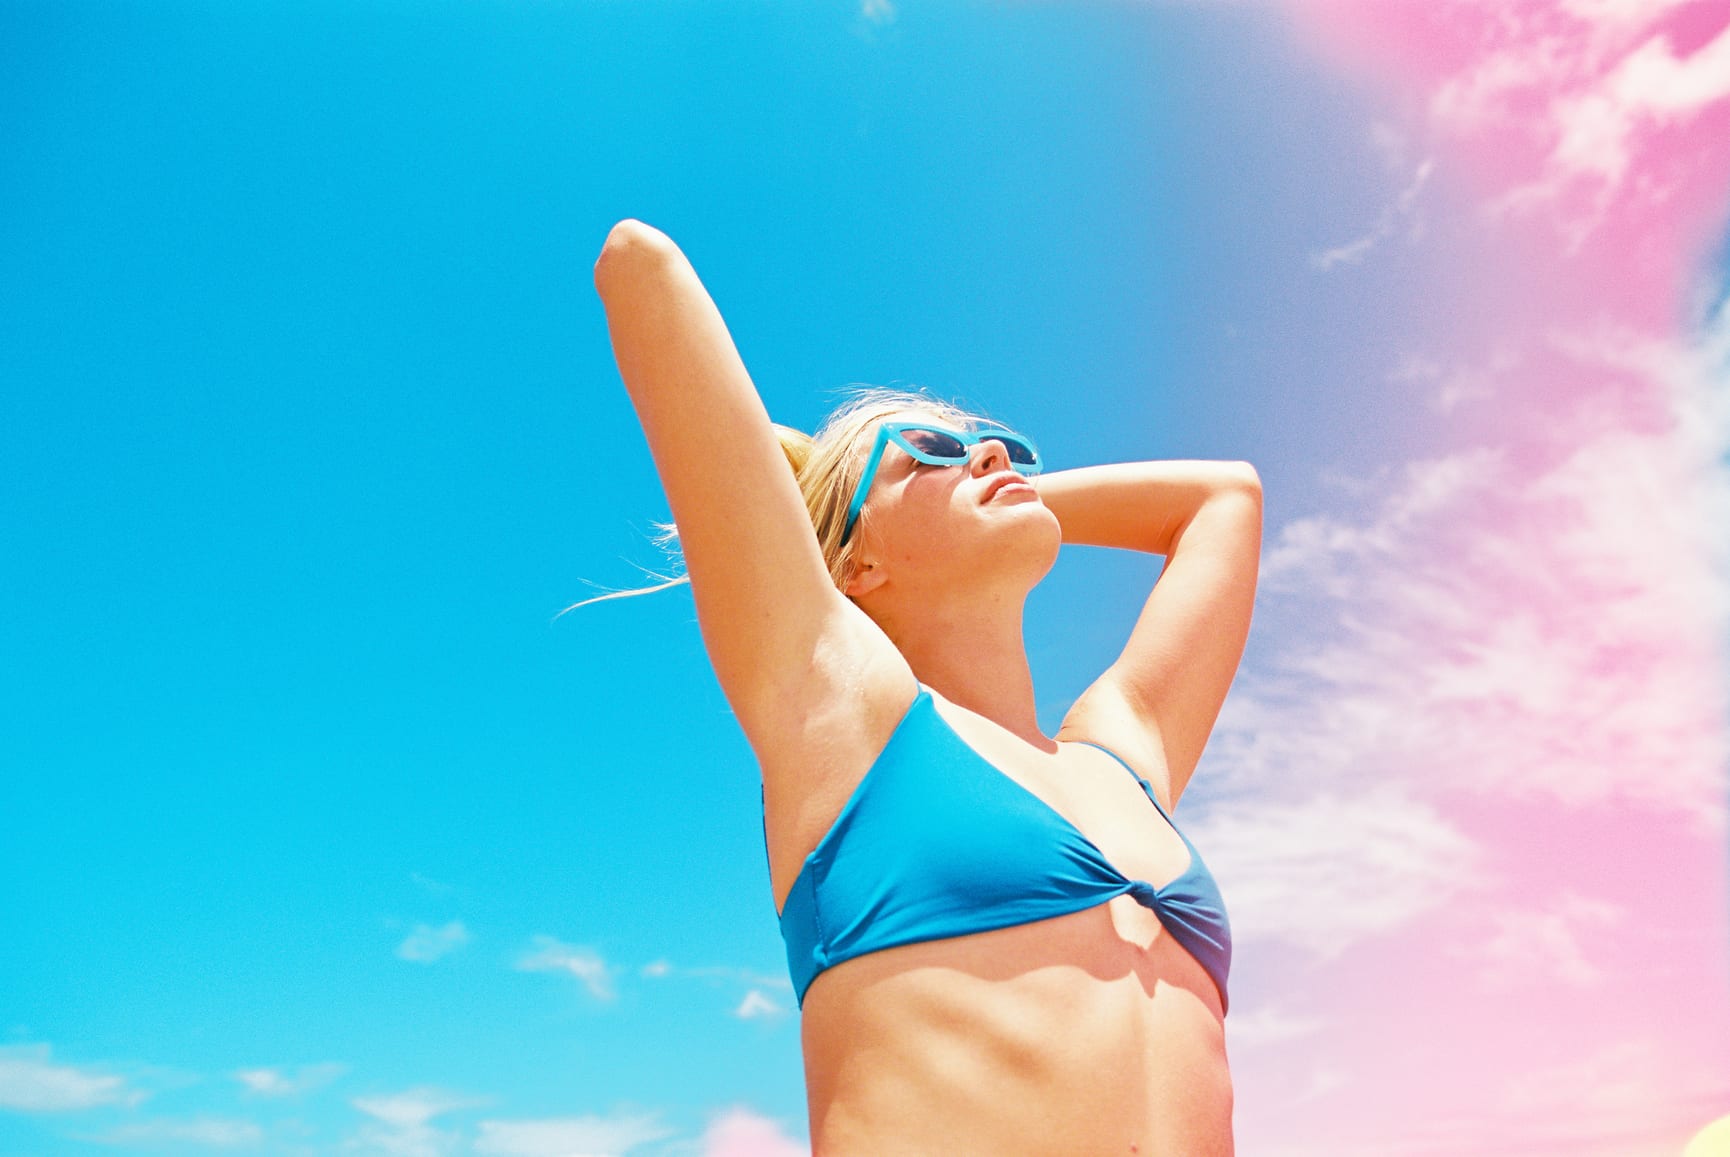 Blonde girl in blue bikini at beach in full sun in summer with a sunglasses and rainbow towel